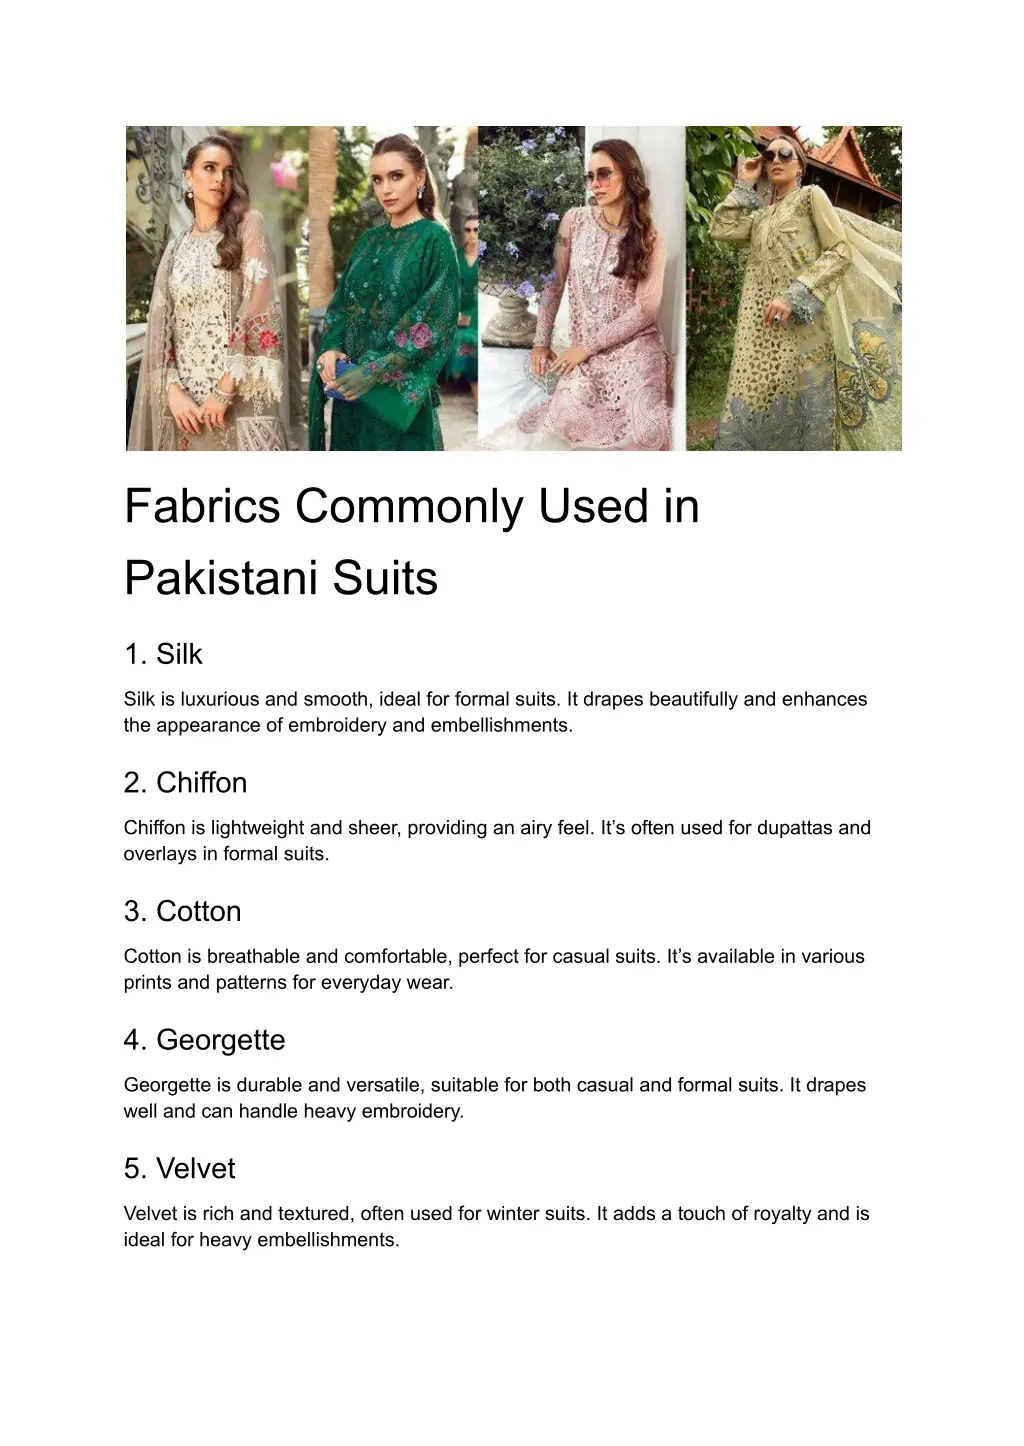 fabrics commonly used in pakistani suits